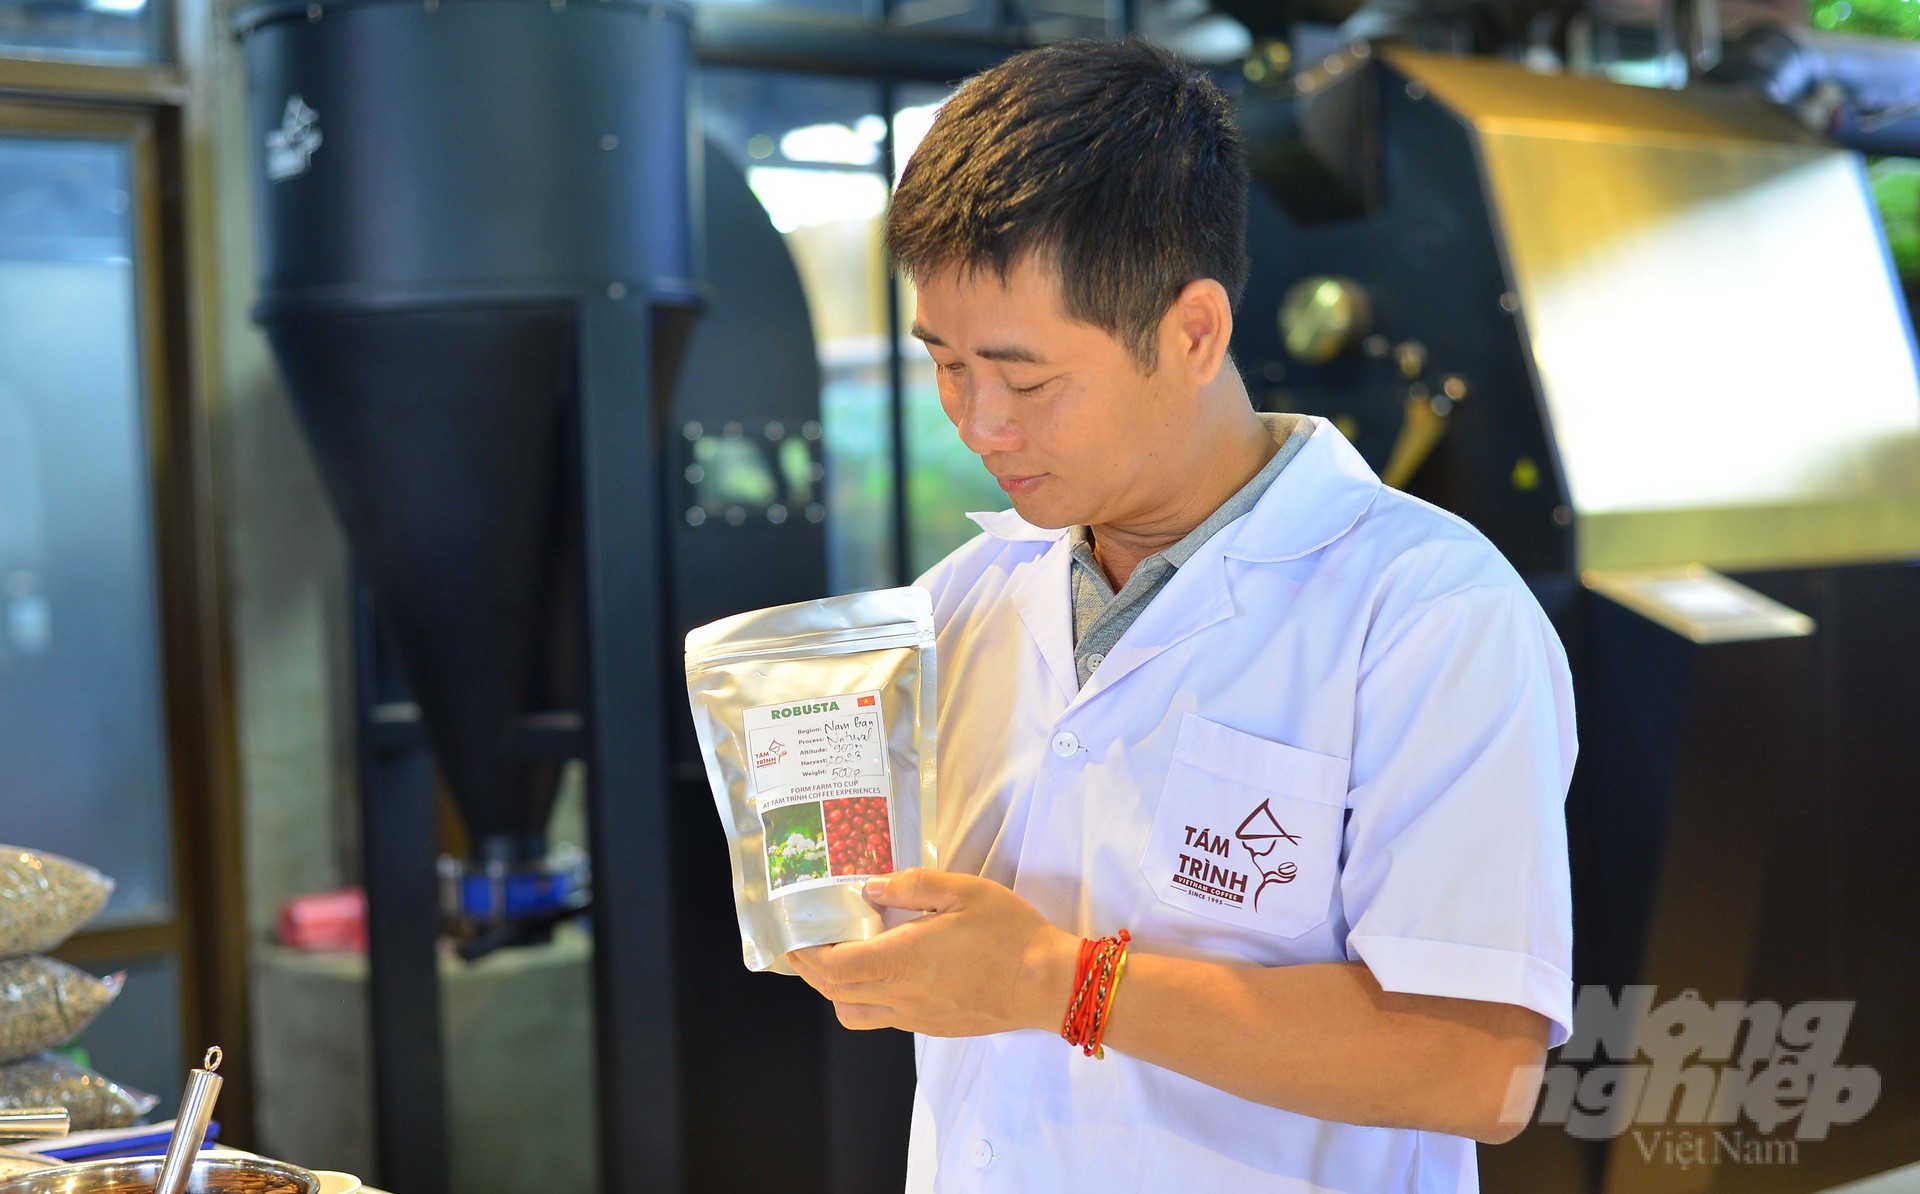 Robusta coffee products from Lam Dong province are mainly exported to European markets such as Germany, Spain, Belgium, and Italy, and Asian markets such as Taiwan, Korea, Japan, and Indonesia. Photo: Minh Hau.